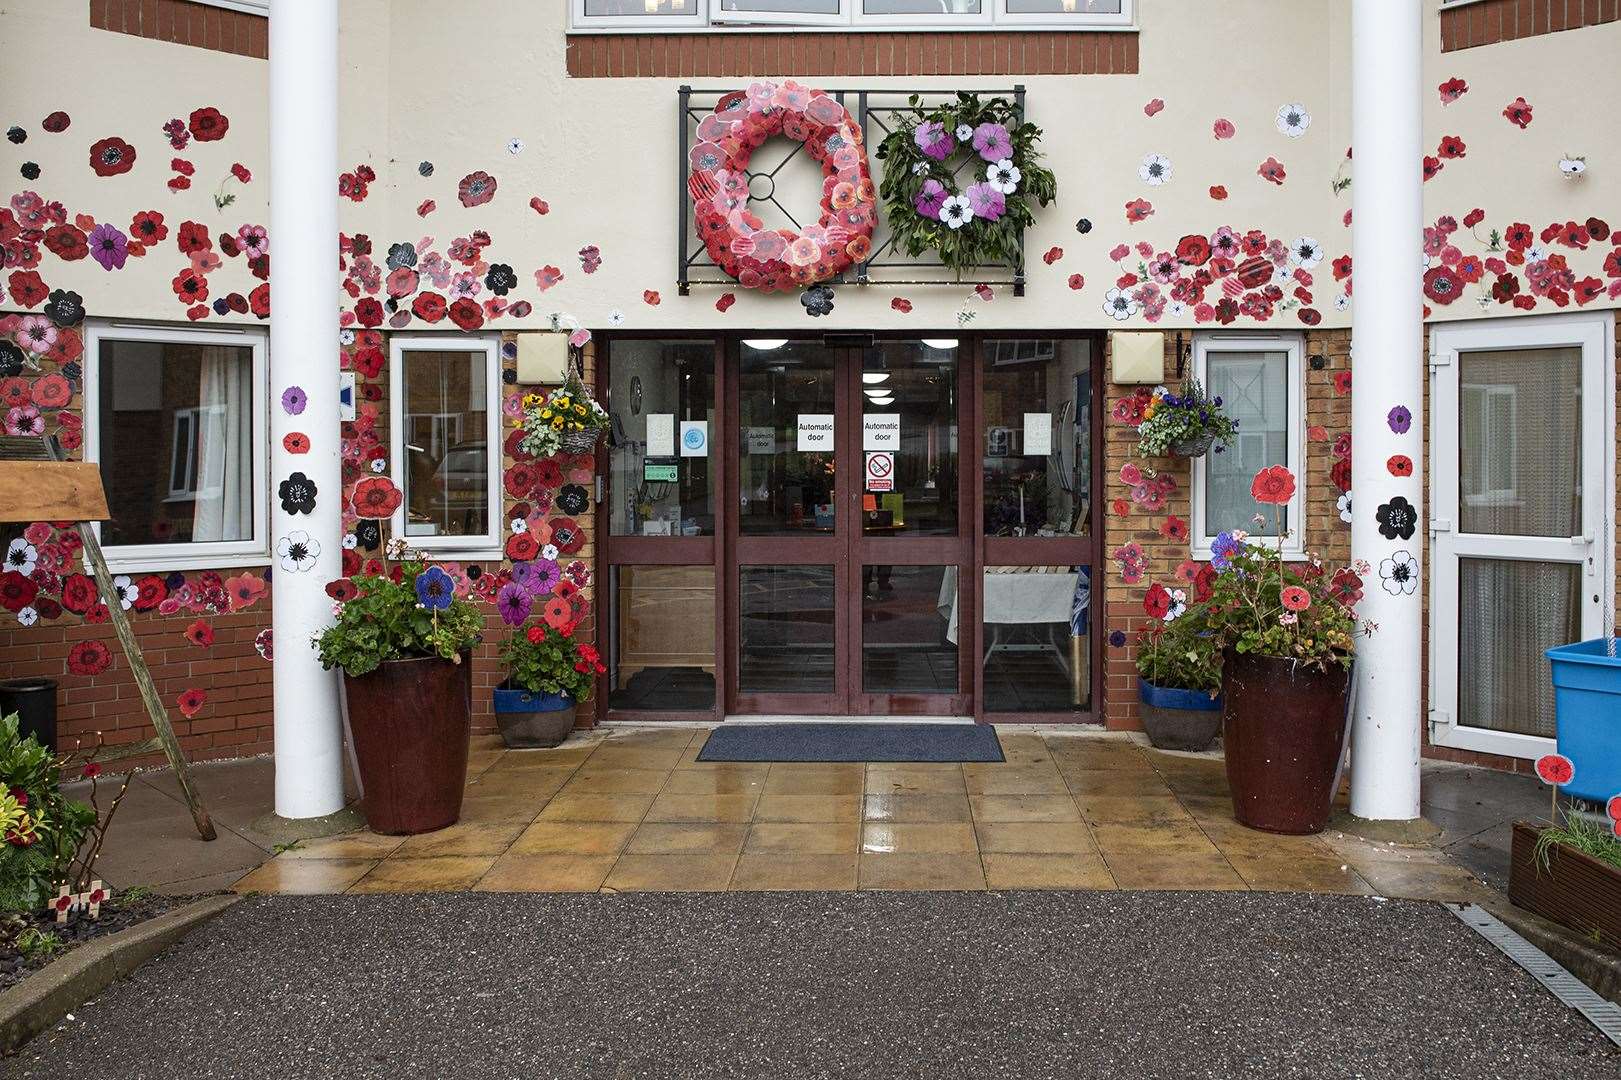 The poppy display at Park View Care Centre in Ashford